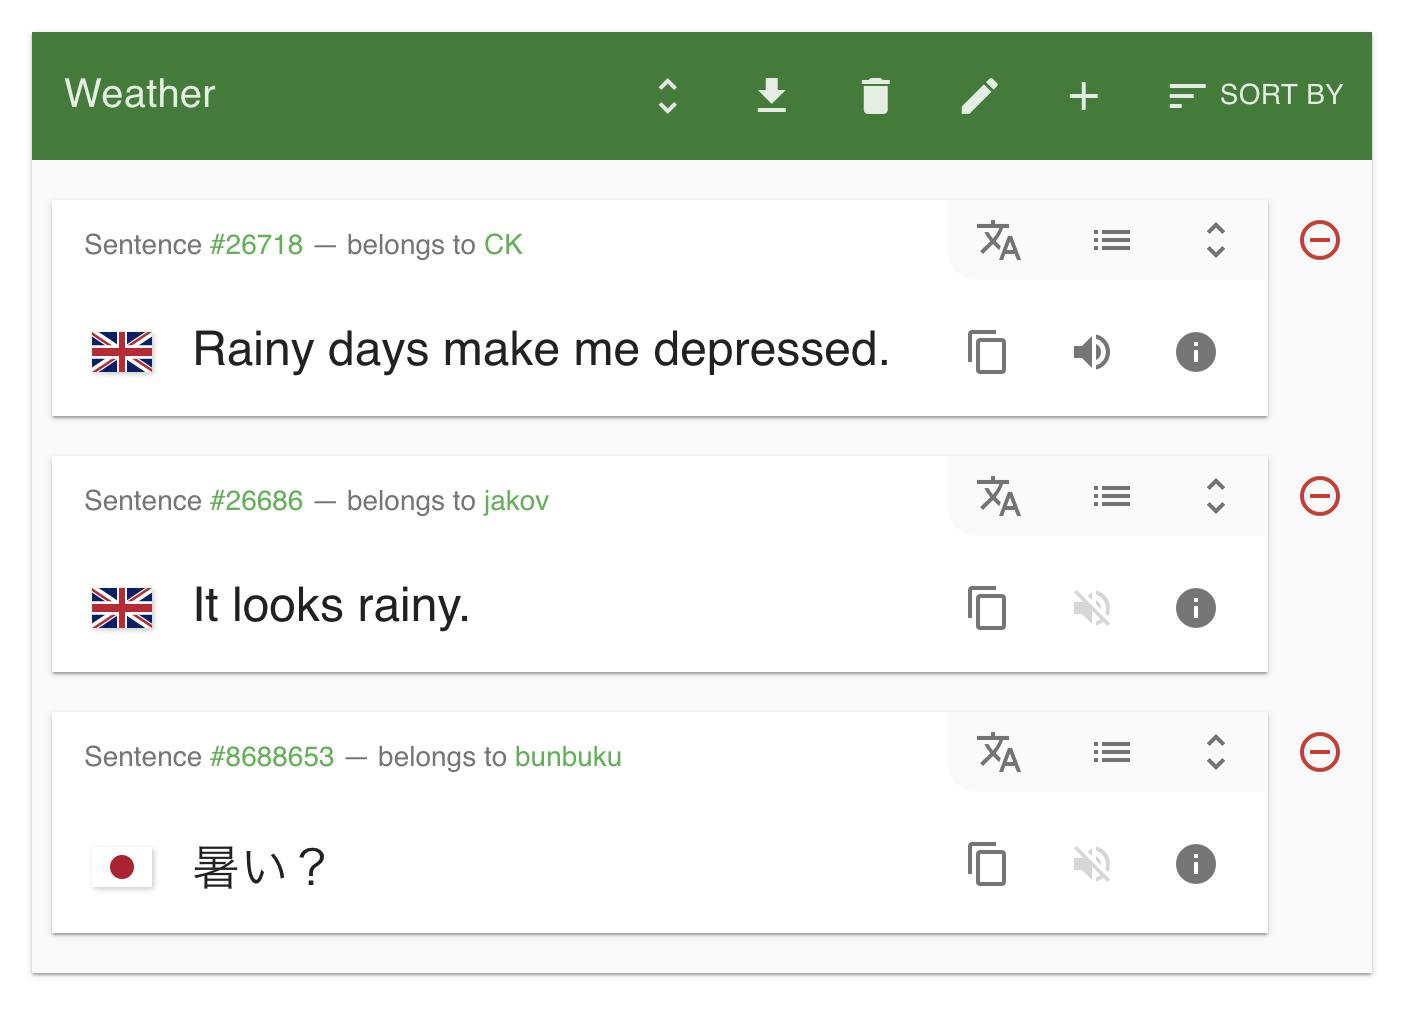 A screen capture of a list called "Weather", on tatoeba.org. It contains three rows, each with a sentence in English or Japanese, as well as some buttons. Notably, the top row has a volume icon, and the other two rows have a muted volume icon.